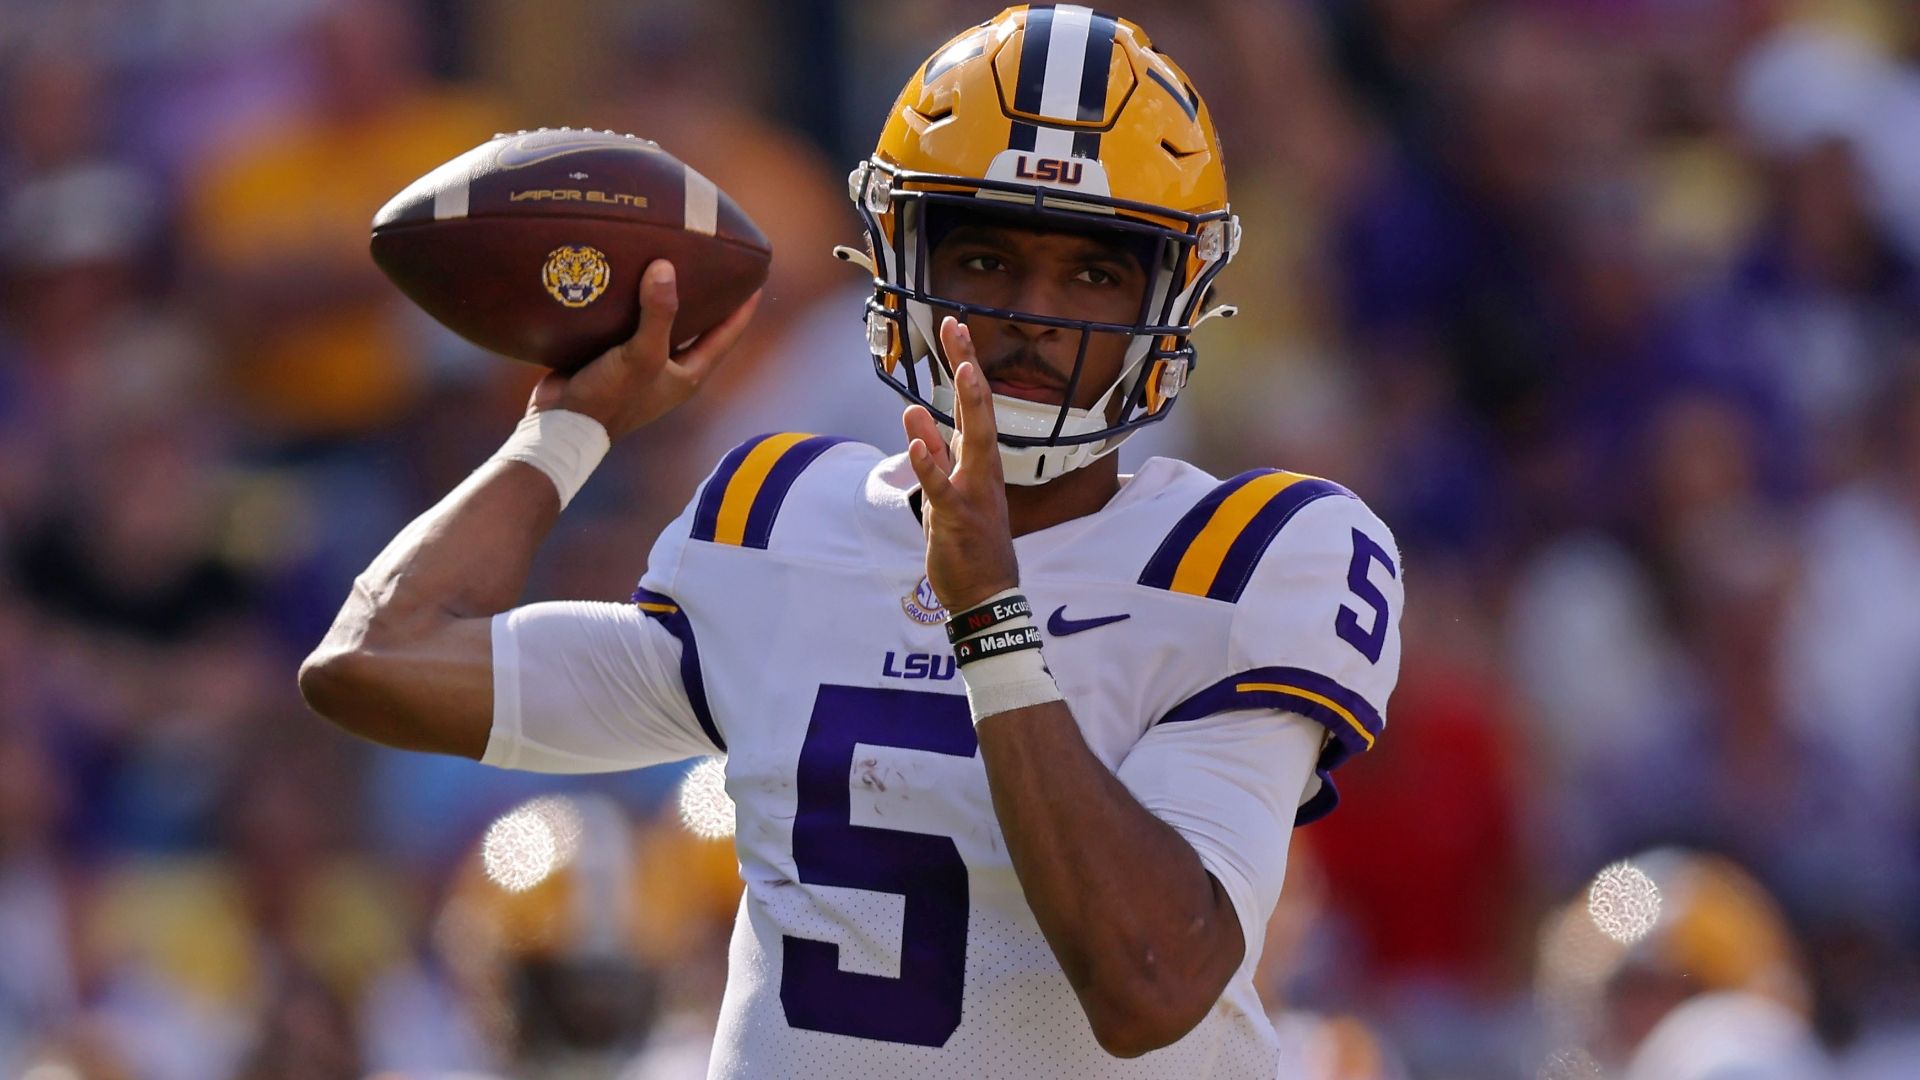 Can QB Daniels level up, utilize loaded LSU roster?